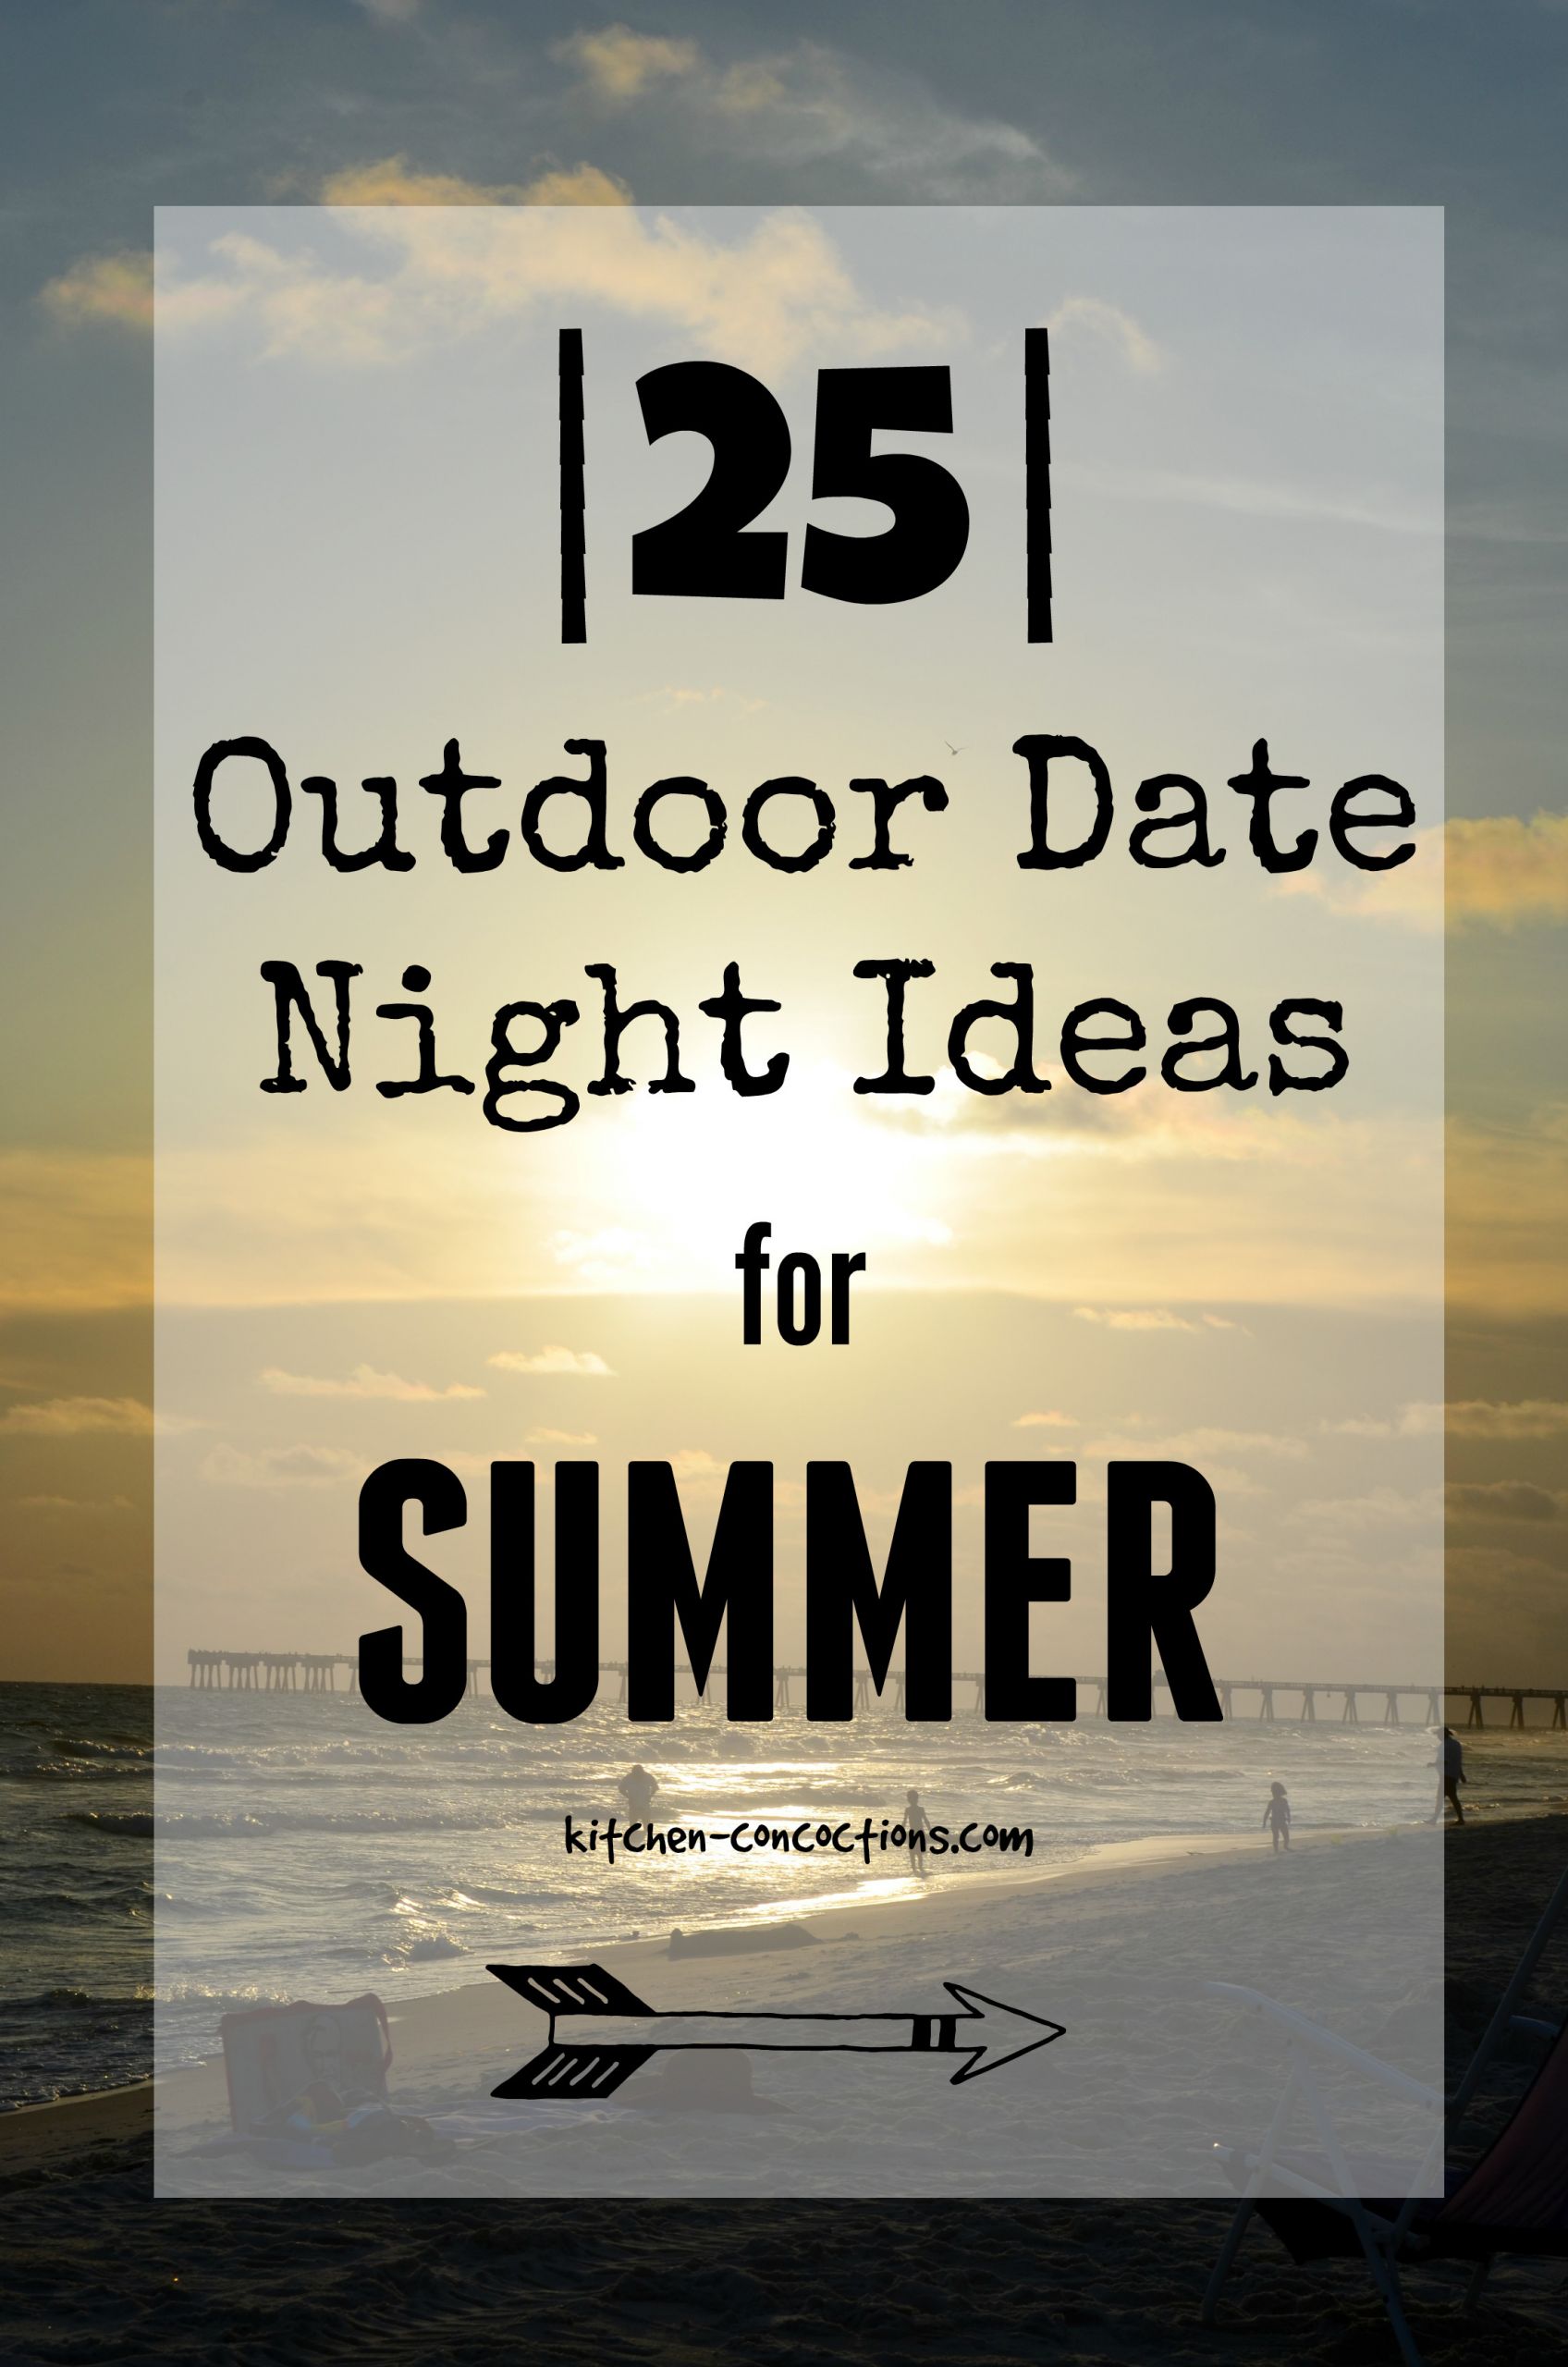 Summer Date Ideas
 25 Outdoor Date Night Ideas for Summer Kitchen Concoctions